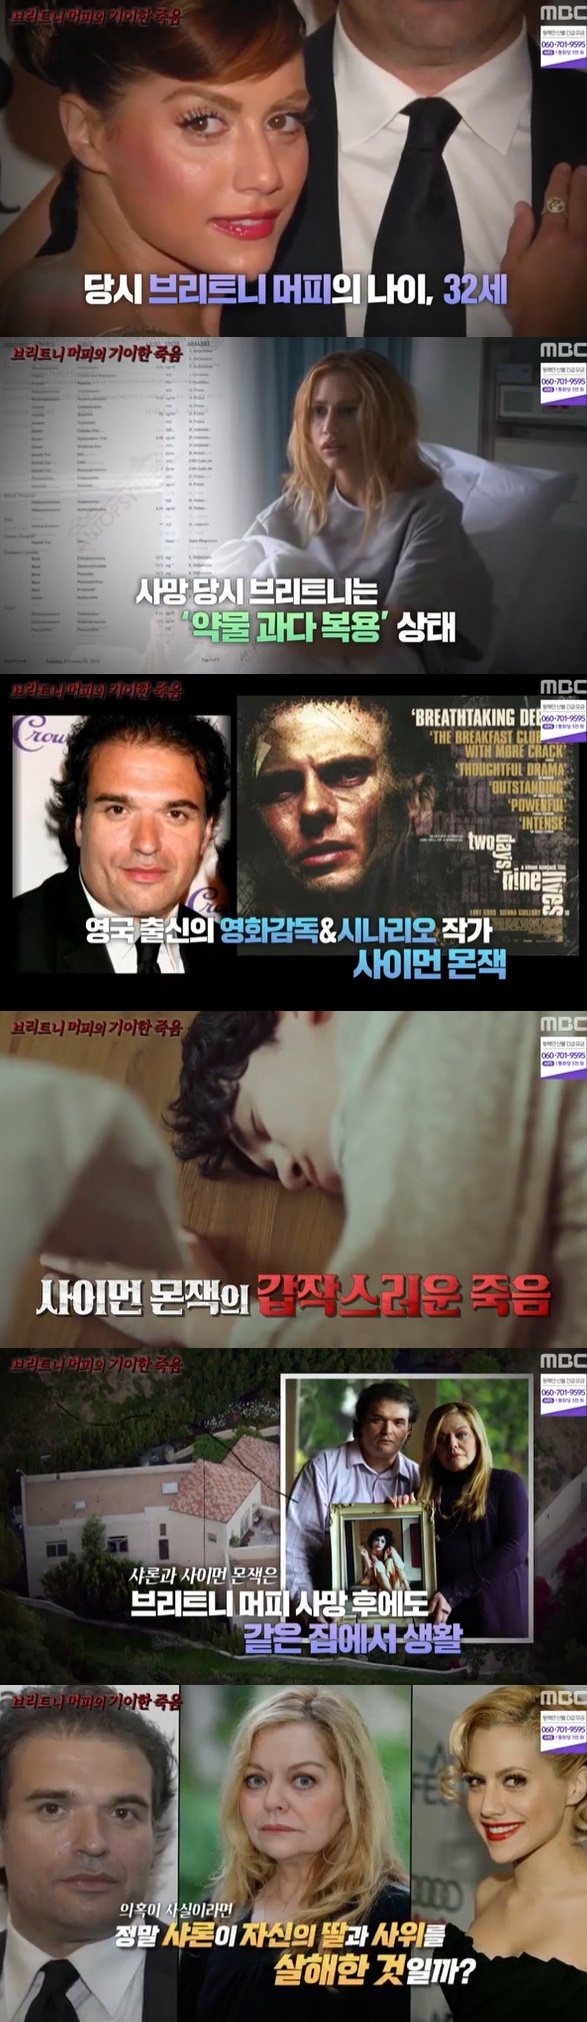 Why did American famous actor Brittany Dan Murphys and his husband Love and Simon Monjack die?MBC Mysterious TV Surprise broadcast on March 13 introduced suspicions about the death of Hollywood actor Britney.Britney Dan Murphys, who appeared in the movie We Just Married, was loved by the personalityist acting, and suddenly died in 2009 and was shocked.Britney was found faint in the shower in her bathroom and her mother, Sharon Dan Murphys, found it and moved it to hospital but died.At the age of 32, he suddenly closed his eyes. The autopsy revealed that the cause of death was sudden death due to pneumonia, that is, natural death, but unexpected death raised suspicions of killing people.According to the autopsy report, Britney was on an overdose, and in fact more than 90 prescriptions and medications were found in the bedroom, even prescriptions prescribed under pseudonyms.Fortunately, all of them were legitimate drugs, but it was a relatively common disease, but it was a wonder that so many drugs were prescribed.People have identified Britneys husband, film director, screenwriter Love, and Simon Monjack as the leading The Suspect.Britney, Love and Simon married in April 2007, less than a year after their first meeting in 2006, according to producer Ellison Burnett and others, Love and Simon had frequent problems with womens relationships.She had two extramarital children, and she was owed 600 million won, and she had married without telling Britney all this.In addition, Love, Simon confiscated Britneys cell phone, managed emails and managed them thoroughly, and fired staff, including managers, to completely isolate her.Most of all, when Britney was about to be autopsyed, Love, Simon even strongly opposed it.I couldnt put a knife on a silky body, he revealed on a news show that starred with his mother Sharon about the reason.Since then, he has been on a series of unintelligible travels, including demanding the memorial to Britneys fans as a semi-compulsory.With the suspicion that The Suspect would be Love, Simon, the incident fell further into the labyrinth as Love and Simon suddenly died in 2010, five months after Brittany.What is even more surprising is that his cause of death was pneumonia, and it was a coincidence that a young man and woman in their 30s died at the same house for the same reason every five months.When Britney, Love and Simon died in succession, another person emerged as a powerful The Suspect, the mother Sharon Dan Murphys.The three lived together in a house after their marriage, and even Sharon used a bed with Love and Simon to shock Britney after her death.Sharon also raised doubts that he strongly opposed Britneys autopsy.If the suspicion is true, did Sharon really kill his daughter and son-in-law?Some argue that Sharon, Love, and Simon had an inappropriate relationship and then killed Brittany. After suffering from life, Sharon killed Love and Simon.At the time, it was a suspicion of scandal, but four years later, a large amount of heavy metals were found in Brittanys hair in 2013, and the suspicion of murder of her mother Sharon comes to mind again.Sharon, however, insisted on innocence, saying that her ex-husband, who had conducted the analysis with Britneys hair, had rather framed herself.Rumors are lush, but the mystery surrounding death has yet to be solved, 13 years after Britneys death.Mother Sharon disposed of Sharon, Love and Simons house for 21.8 billion won in 2016 and also sold Sharons costumes and passports.The family fight to take money rather than mourn Britney, who left, continues.